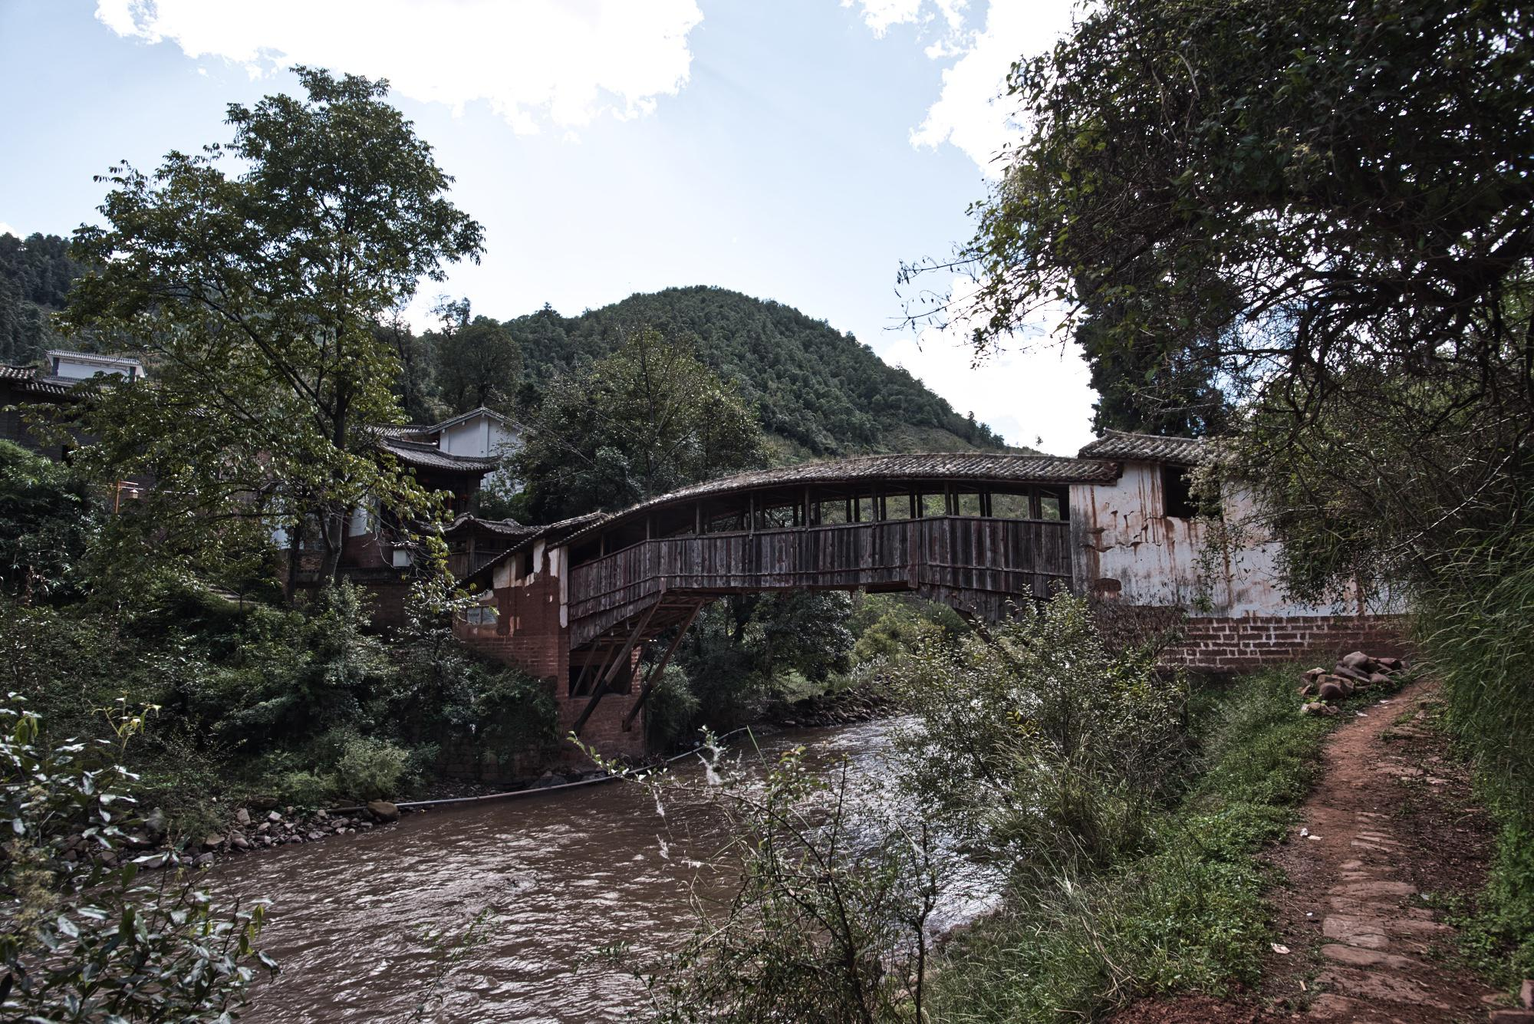 Picture: Traditional style covered wooden bridge in Yunlong county.